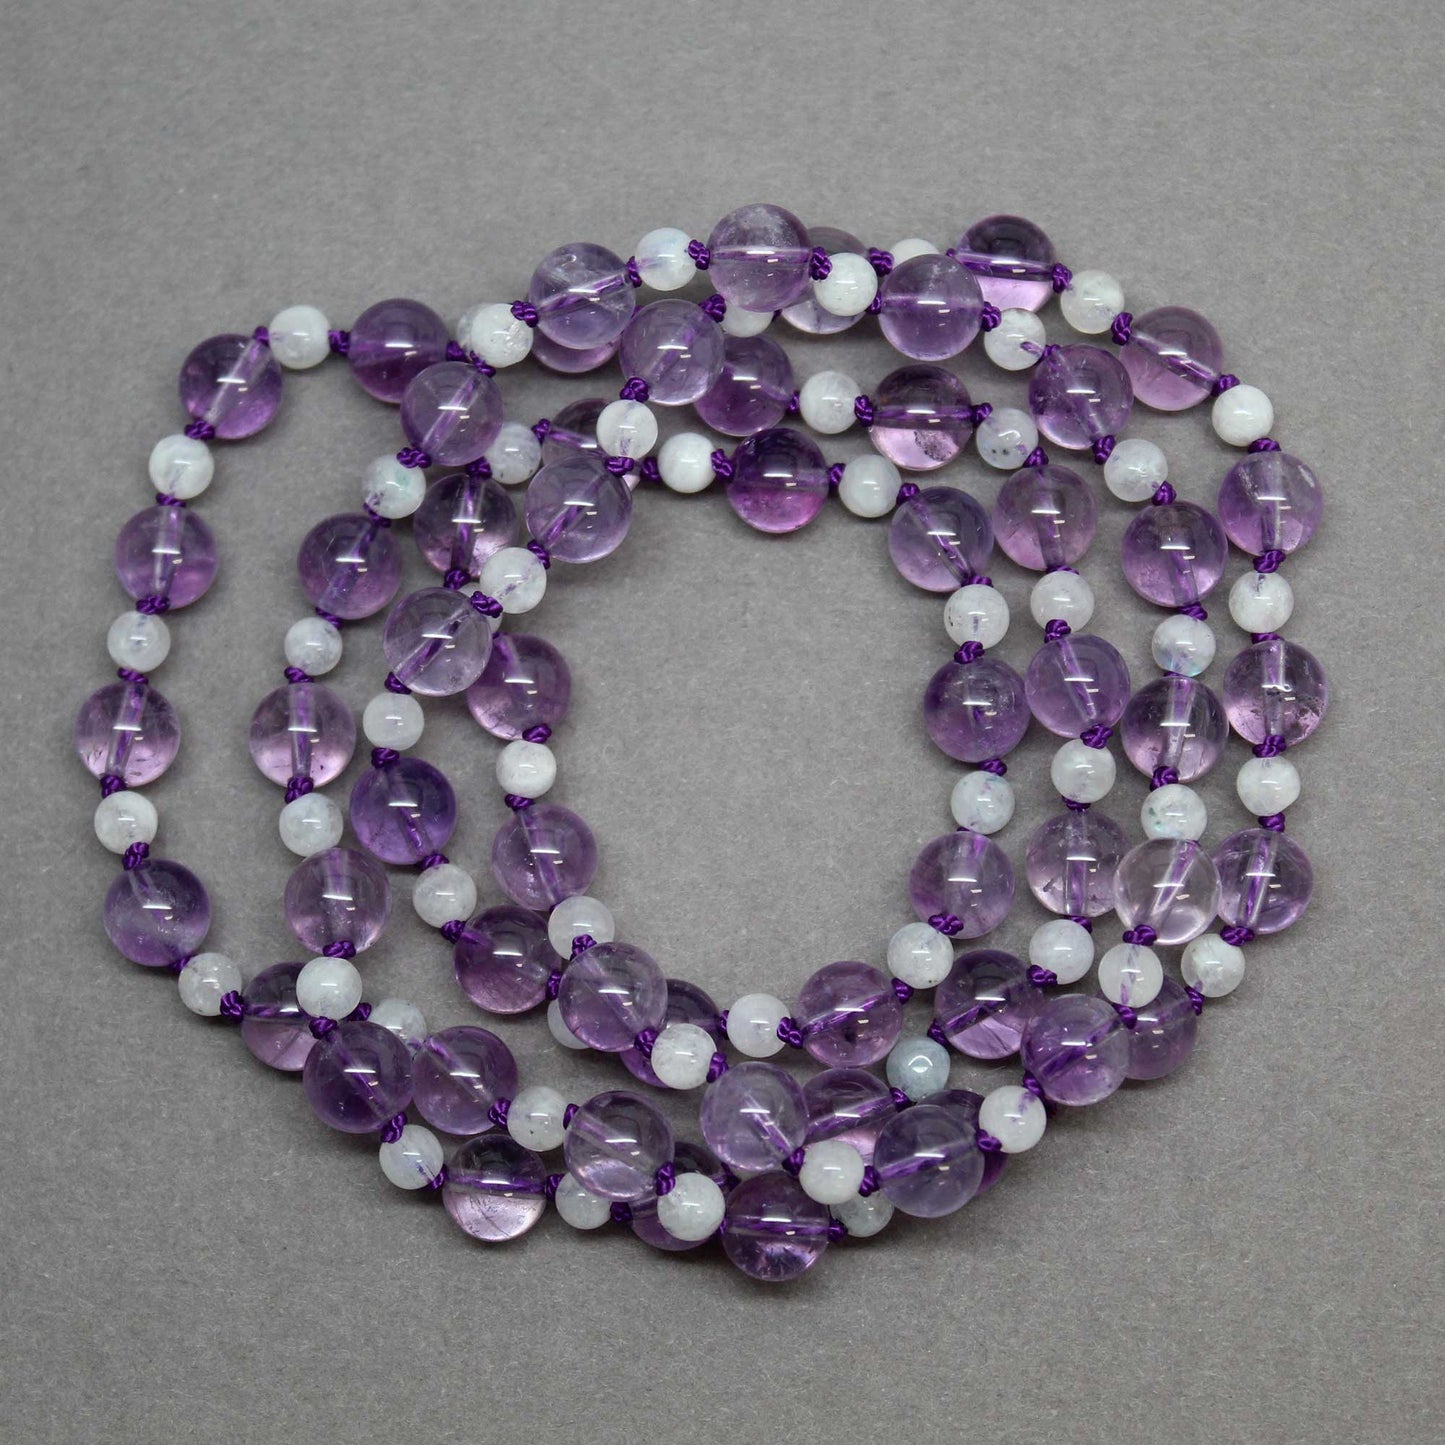 Amethyst and Moonstone Bead Necklace